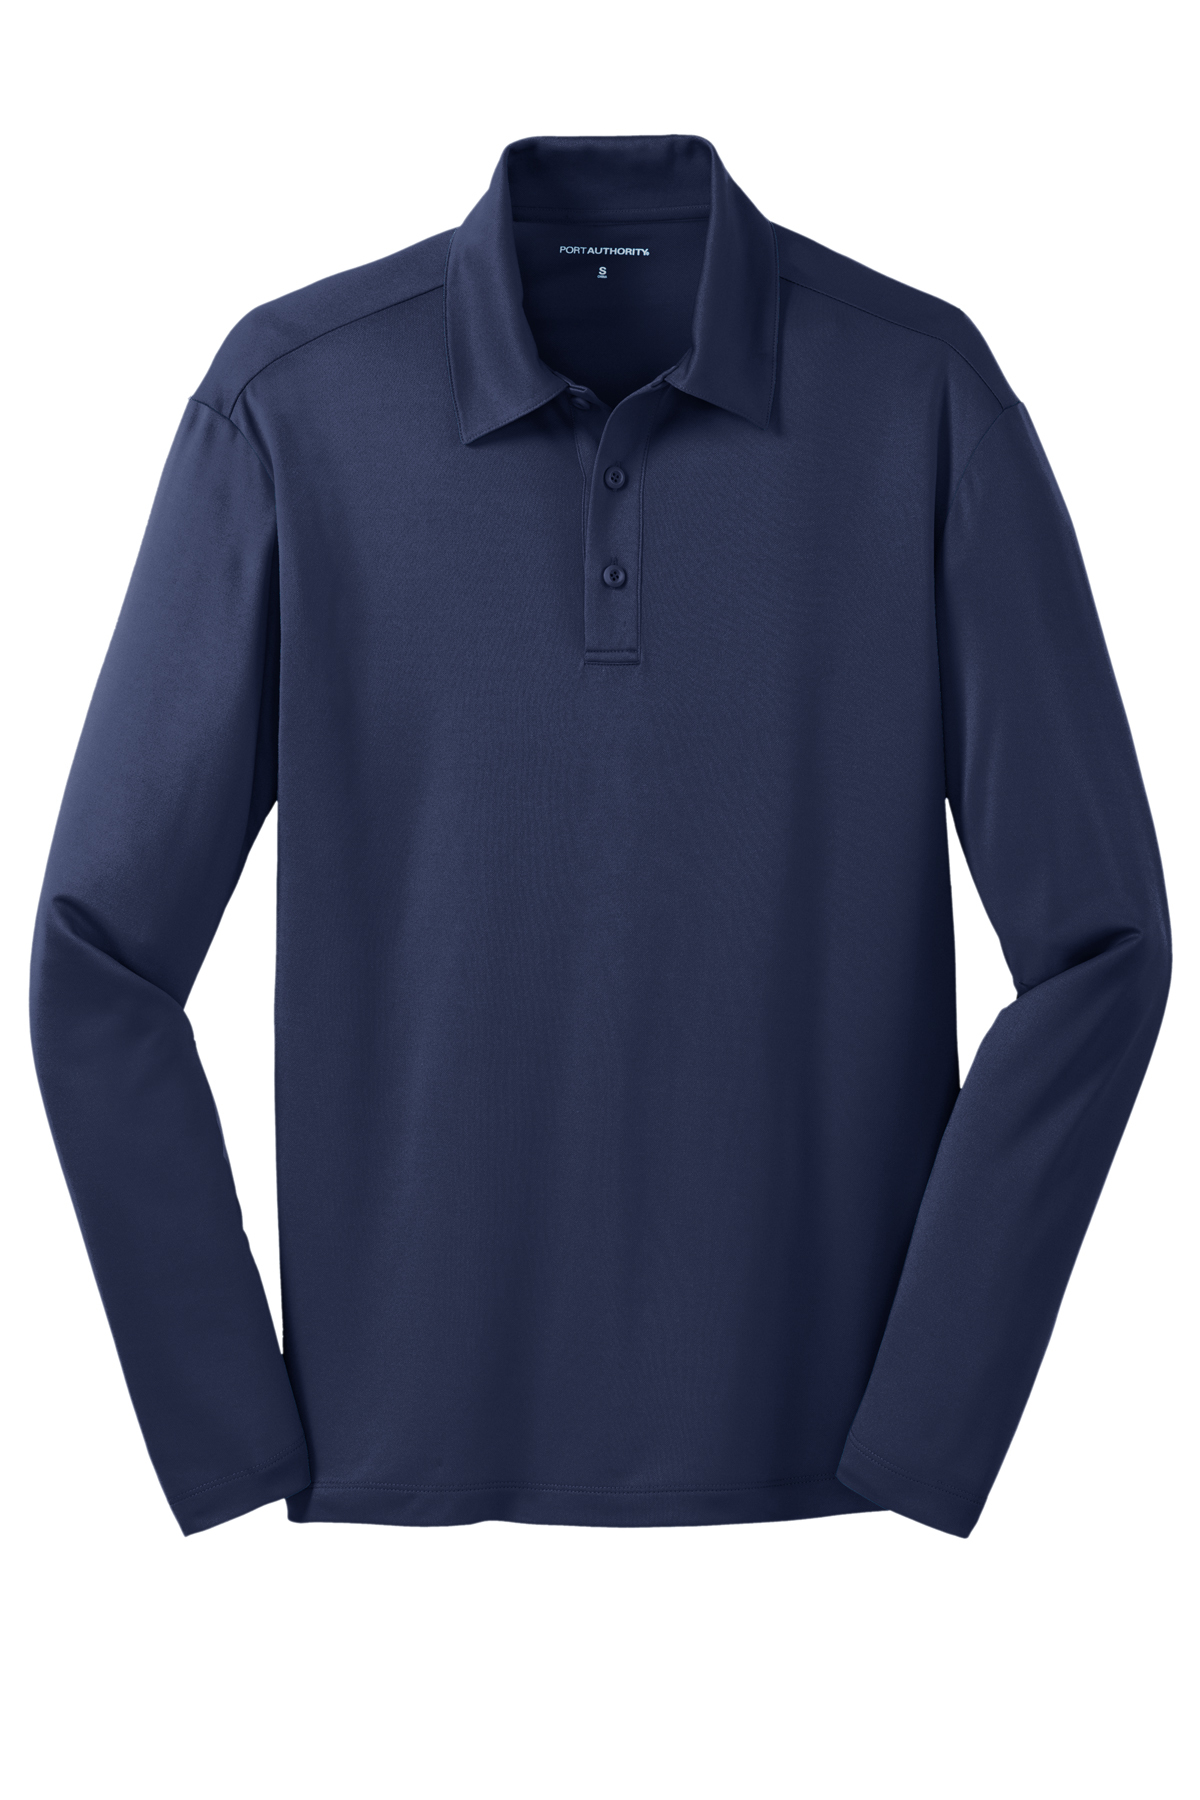 HC- K540LS Adult long sleeve Dri fit polo shirt with logo